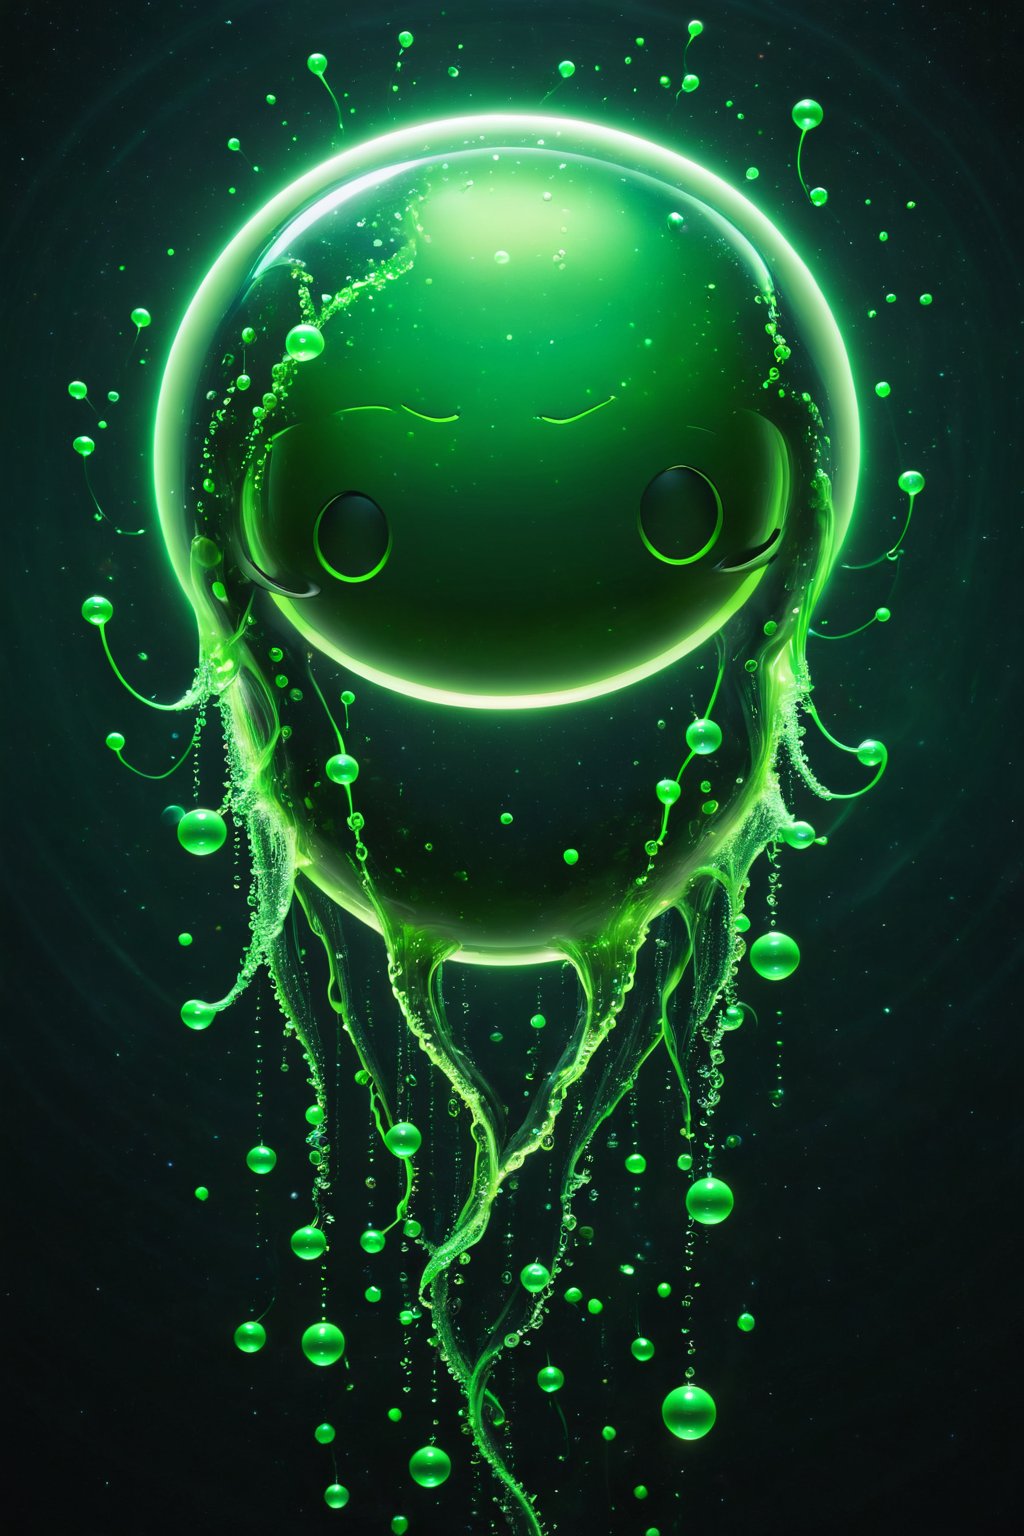 Visualize WhatsApp as an alien lifeform, a green, bioluminescent creature with antennae shaped like speech bubbles, communicating through glowing, floating orbs in a vast, dark, and interconnected space